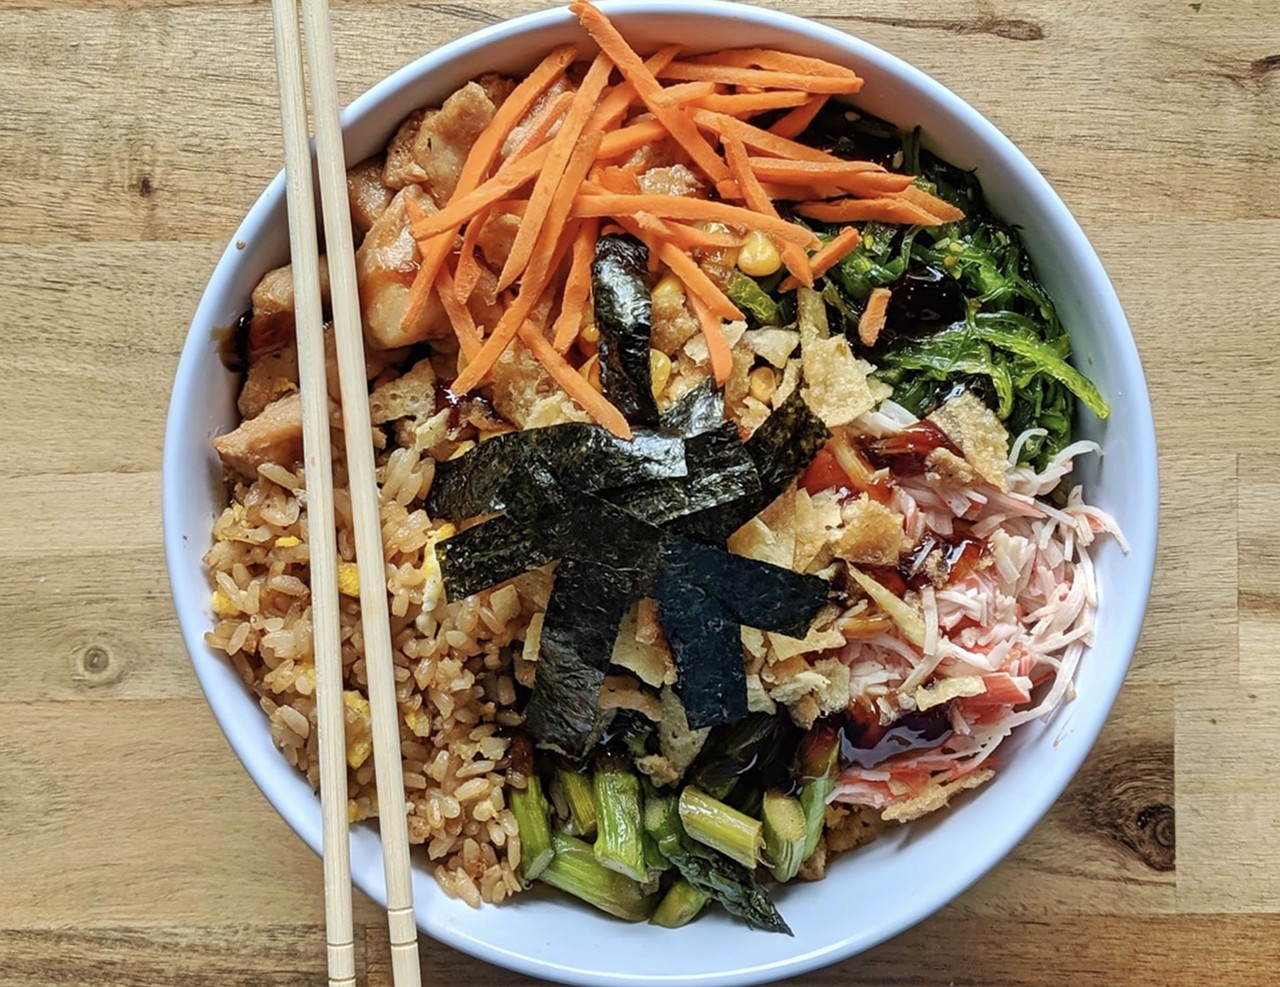 Roll On In
Loop 1604 & Redland Rd., (210) 419-3793, facebook.com/rolloninsanantoniotx
Roll On In’s rice-based bowls, salads and sushi burritos can be made with seaweed or soy wraps. Possible toppings include raw ingredients — think salmon and tuna — as well as cooked accoutrements including salmon, shrimp, chicken, steak, crab and tofu.
Photo via Instagram / roll_on_in